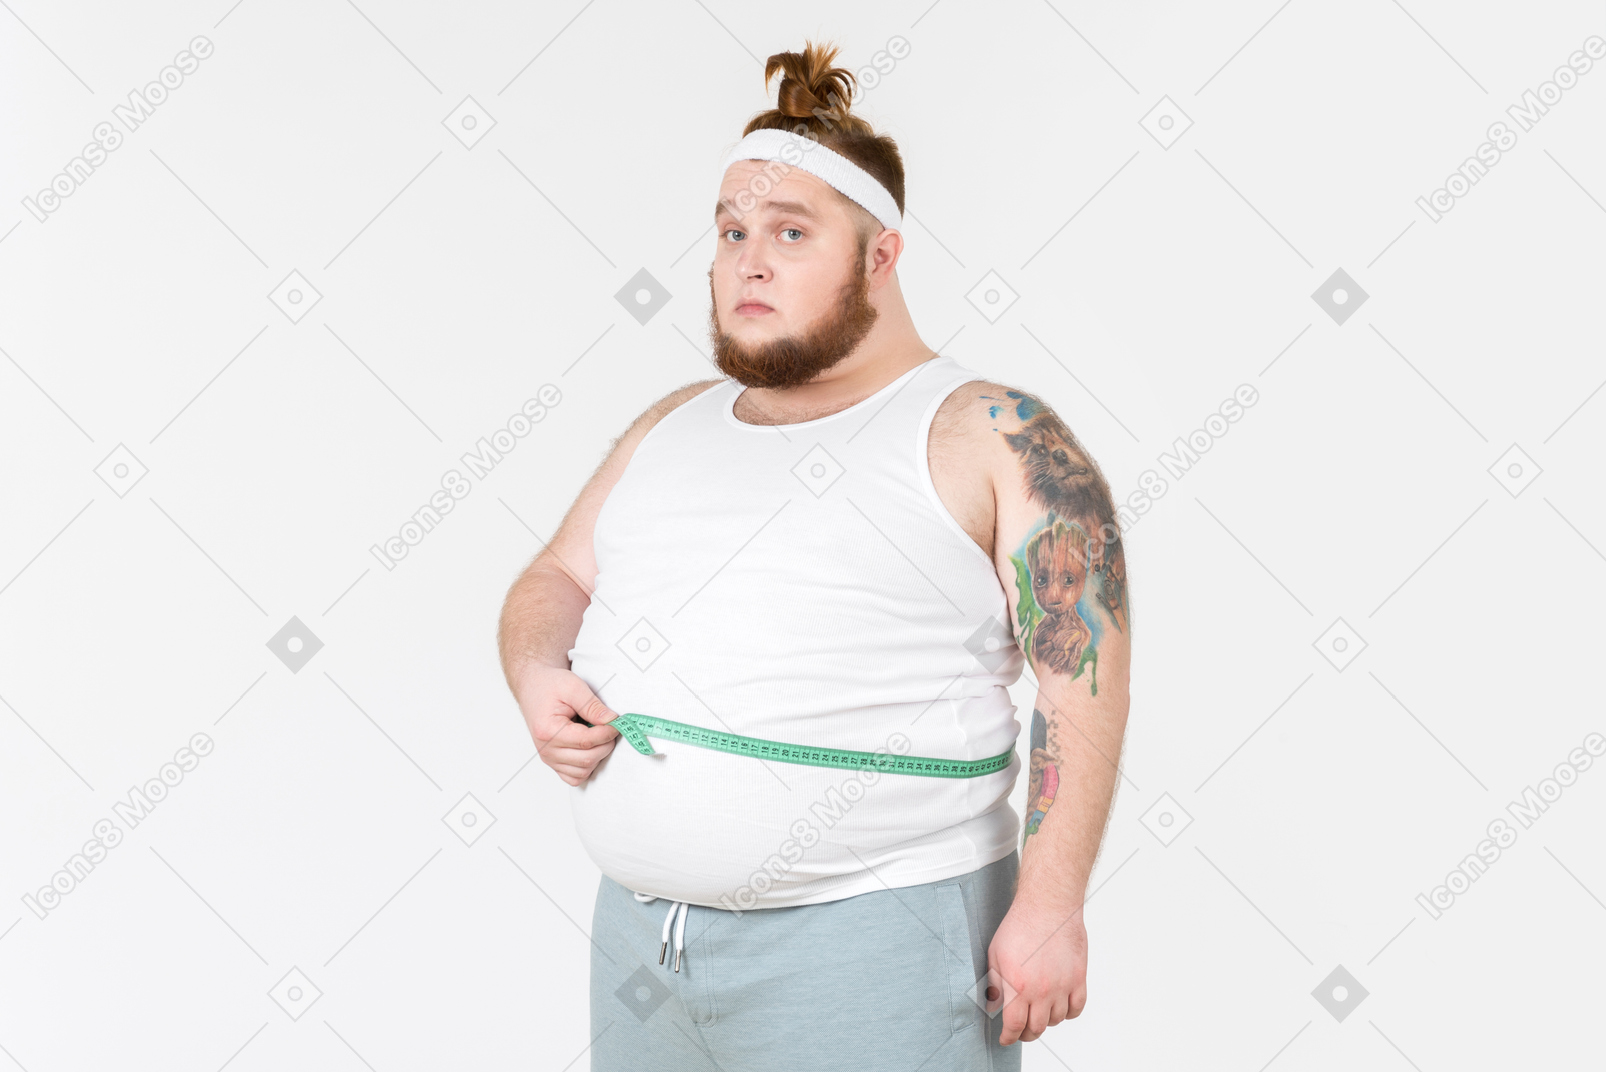 Big guy measuring his waist with cloth ruler